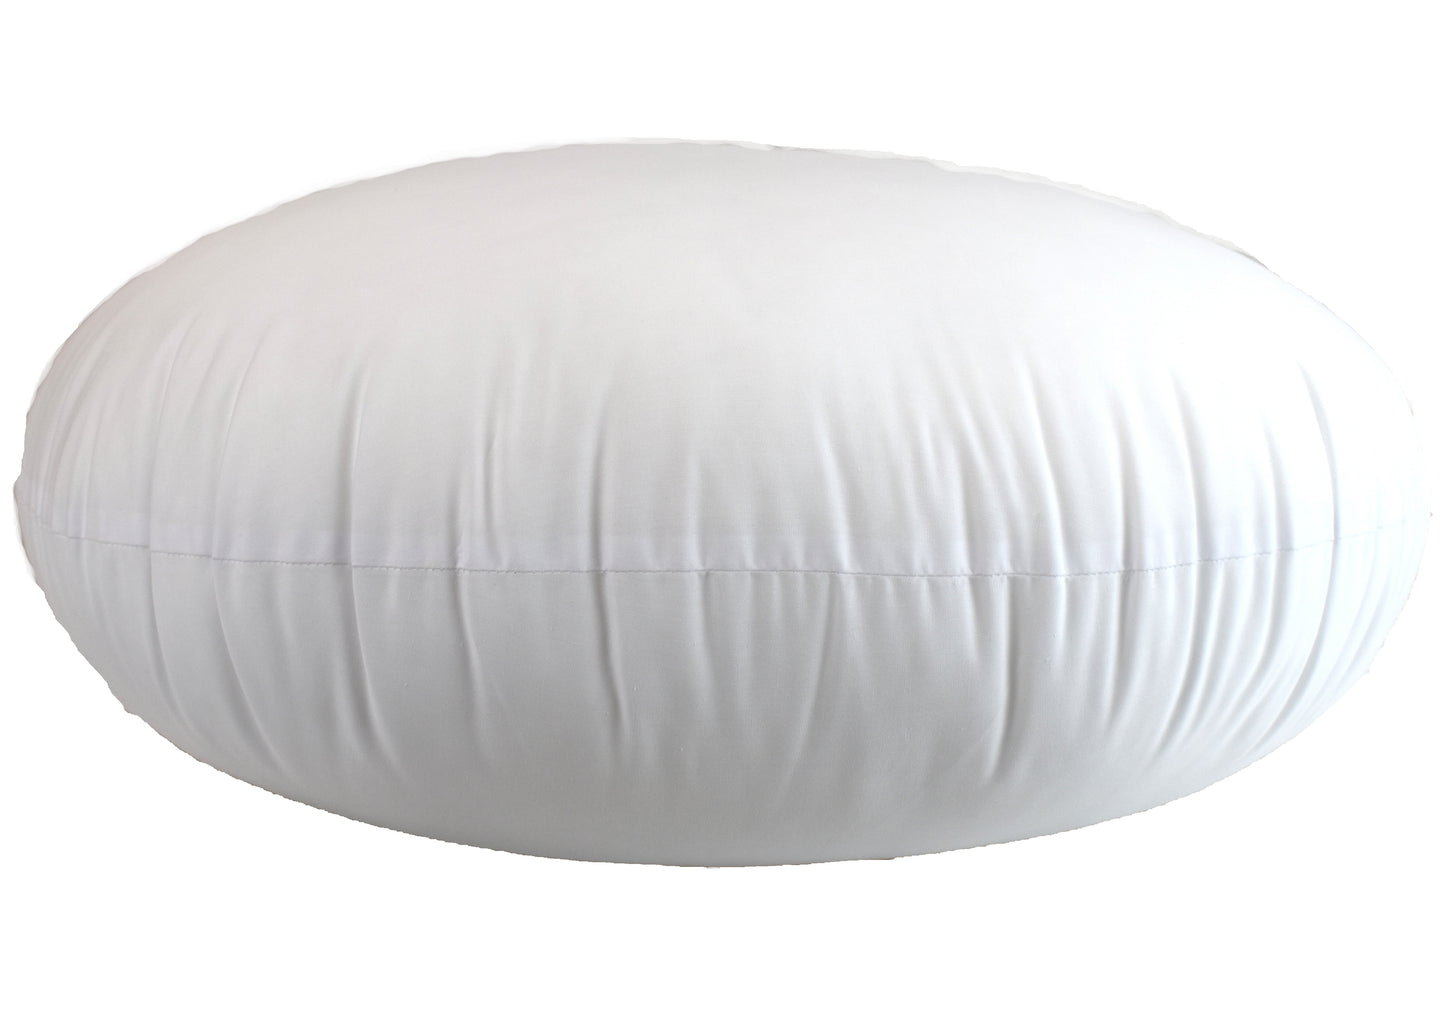 MoonRest Round Pillow Insert Hypoallergenic Polyester Form Stuffer-%100 Cotton Blend Covering for Sofa Sham, Decorative Pillow, Cushion and Bed